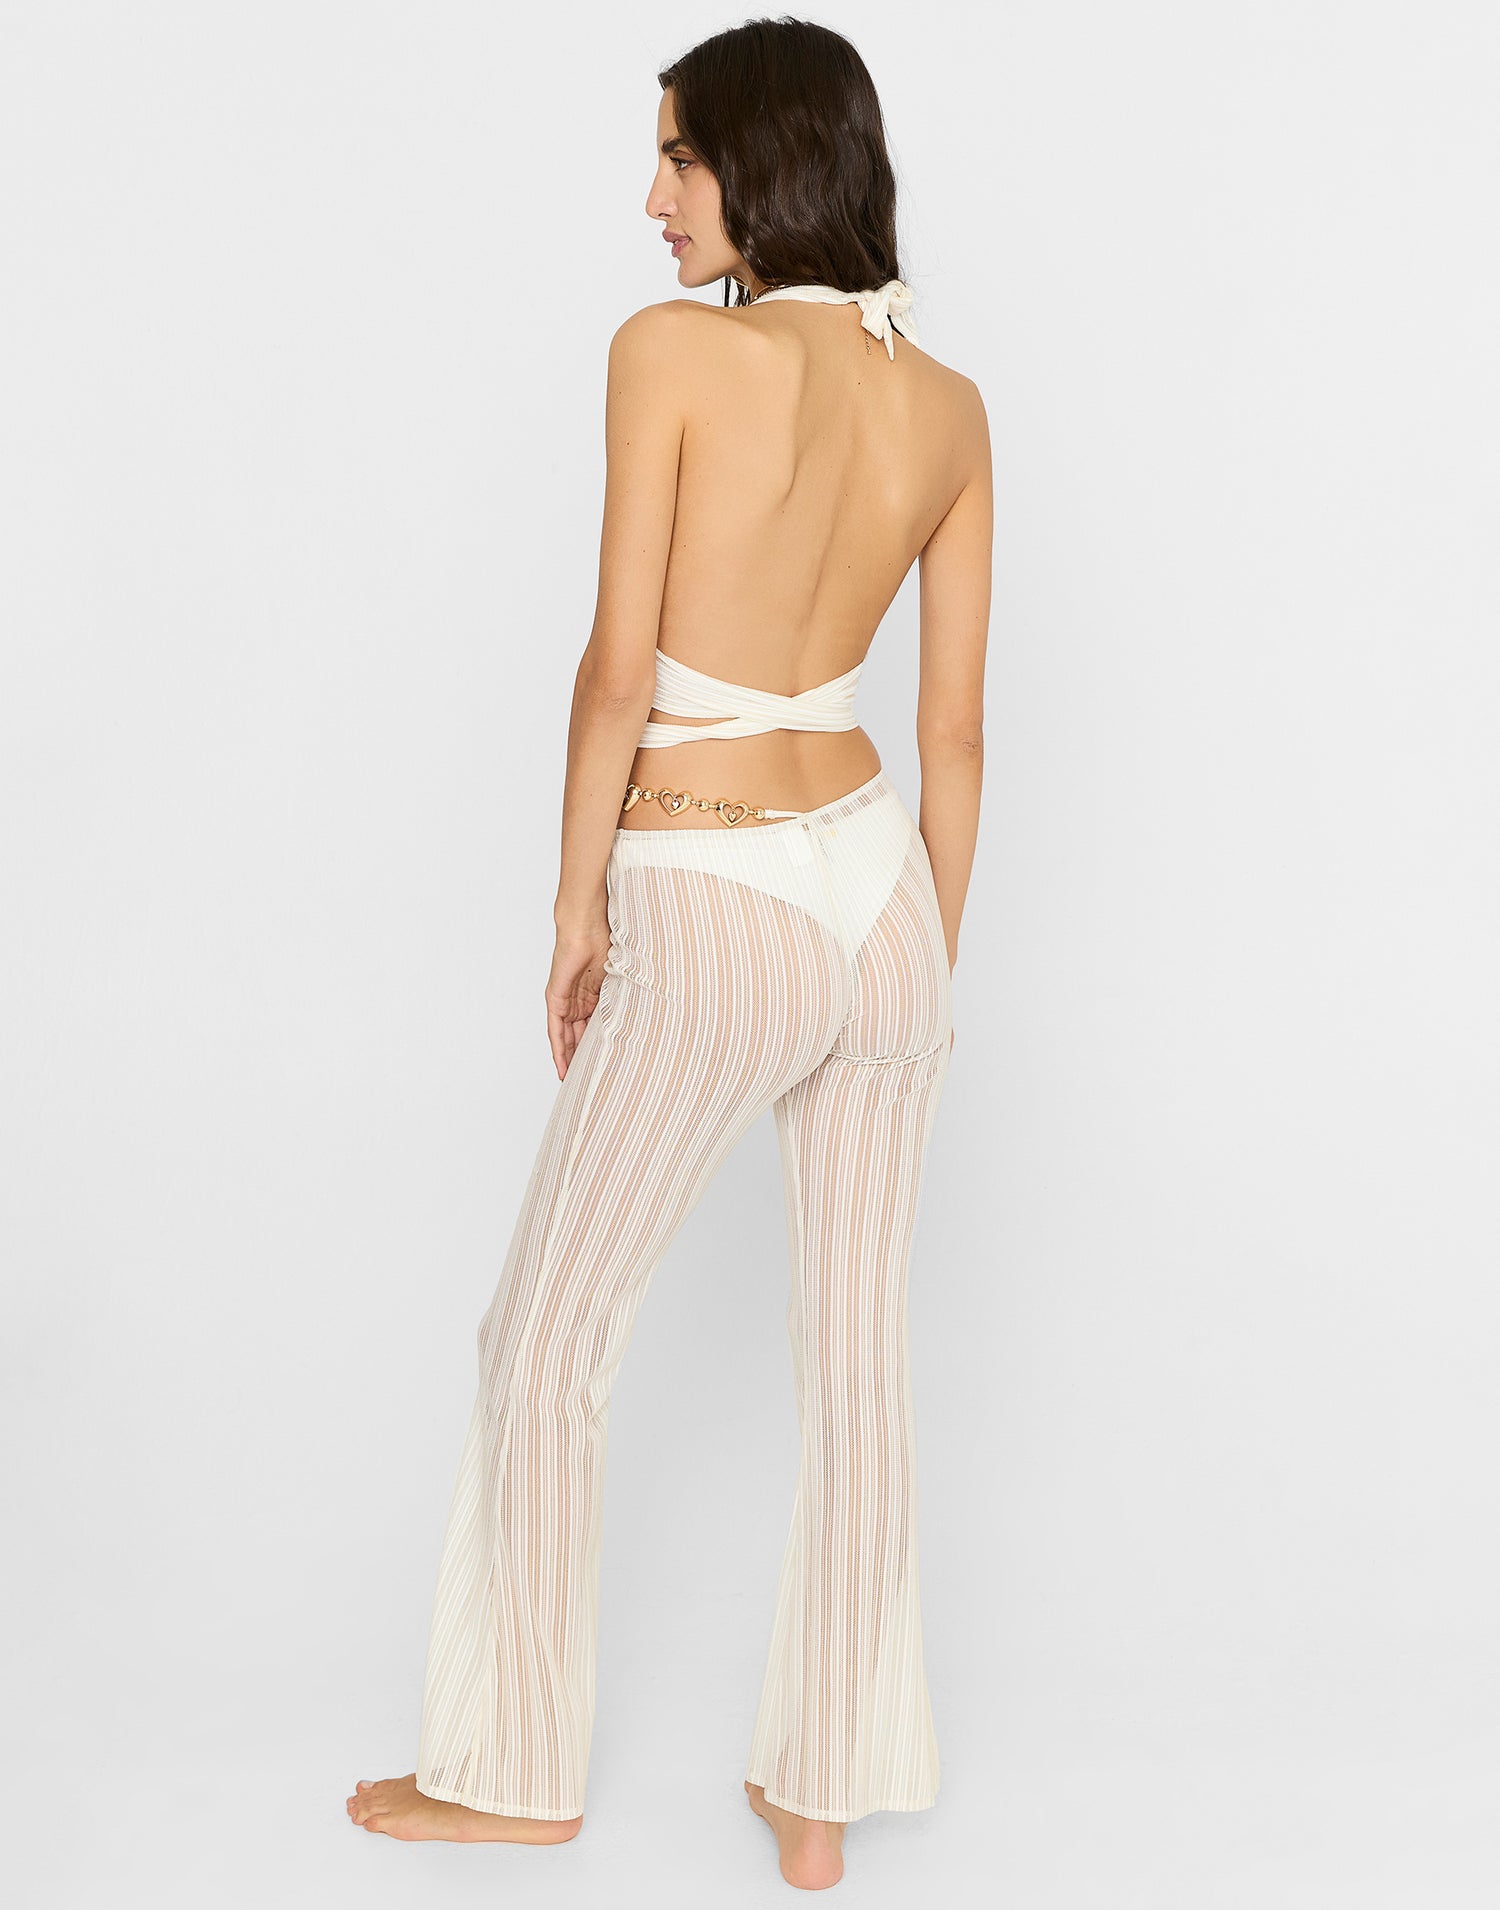 Saddie Mesh Pant Cover Up in White/Gold with Gold Heart Hardware - Back View